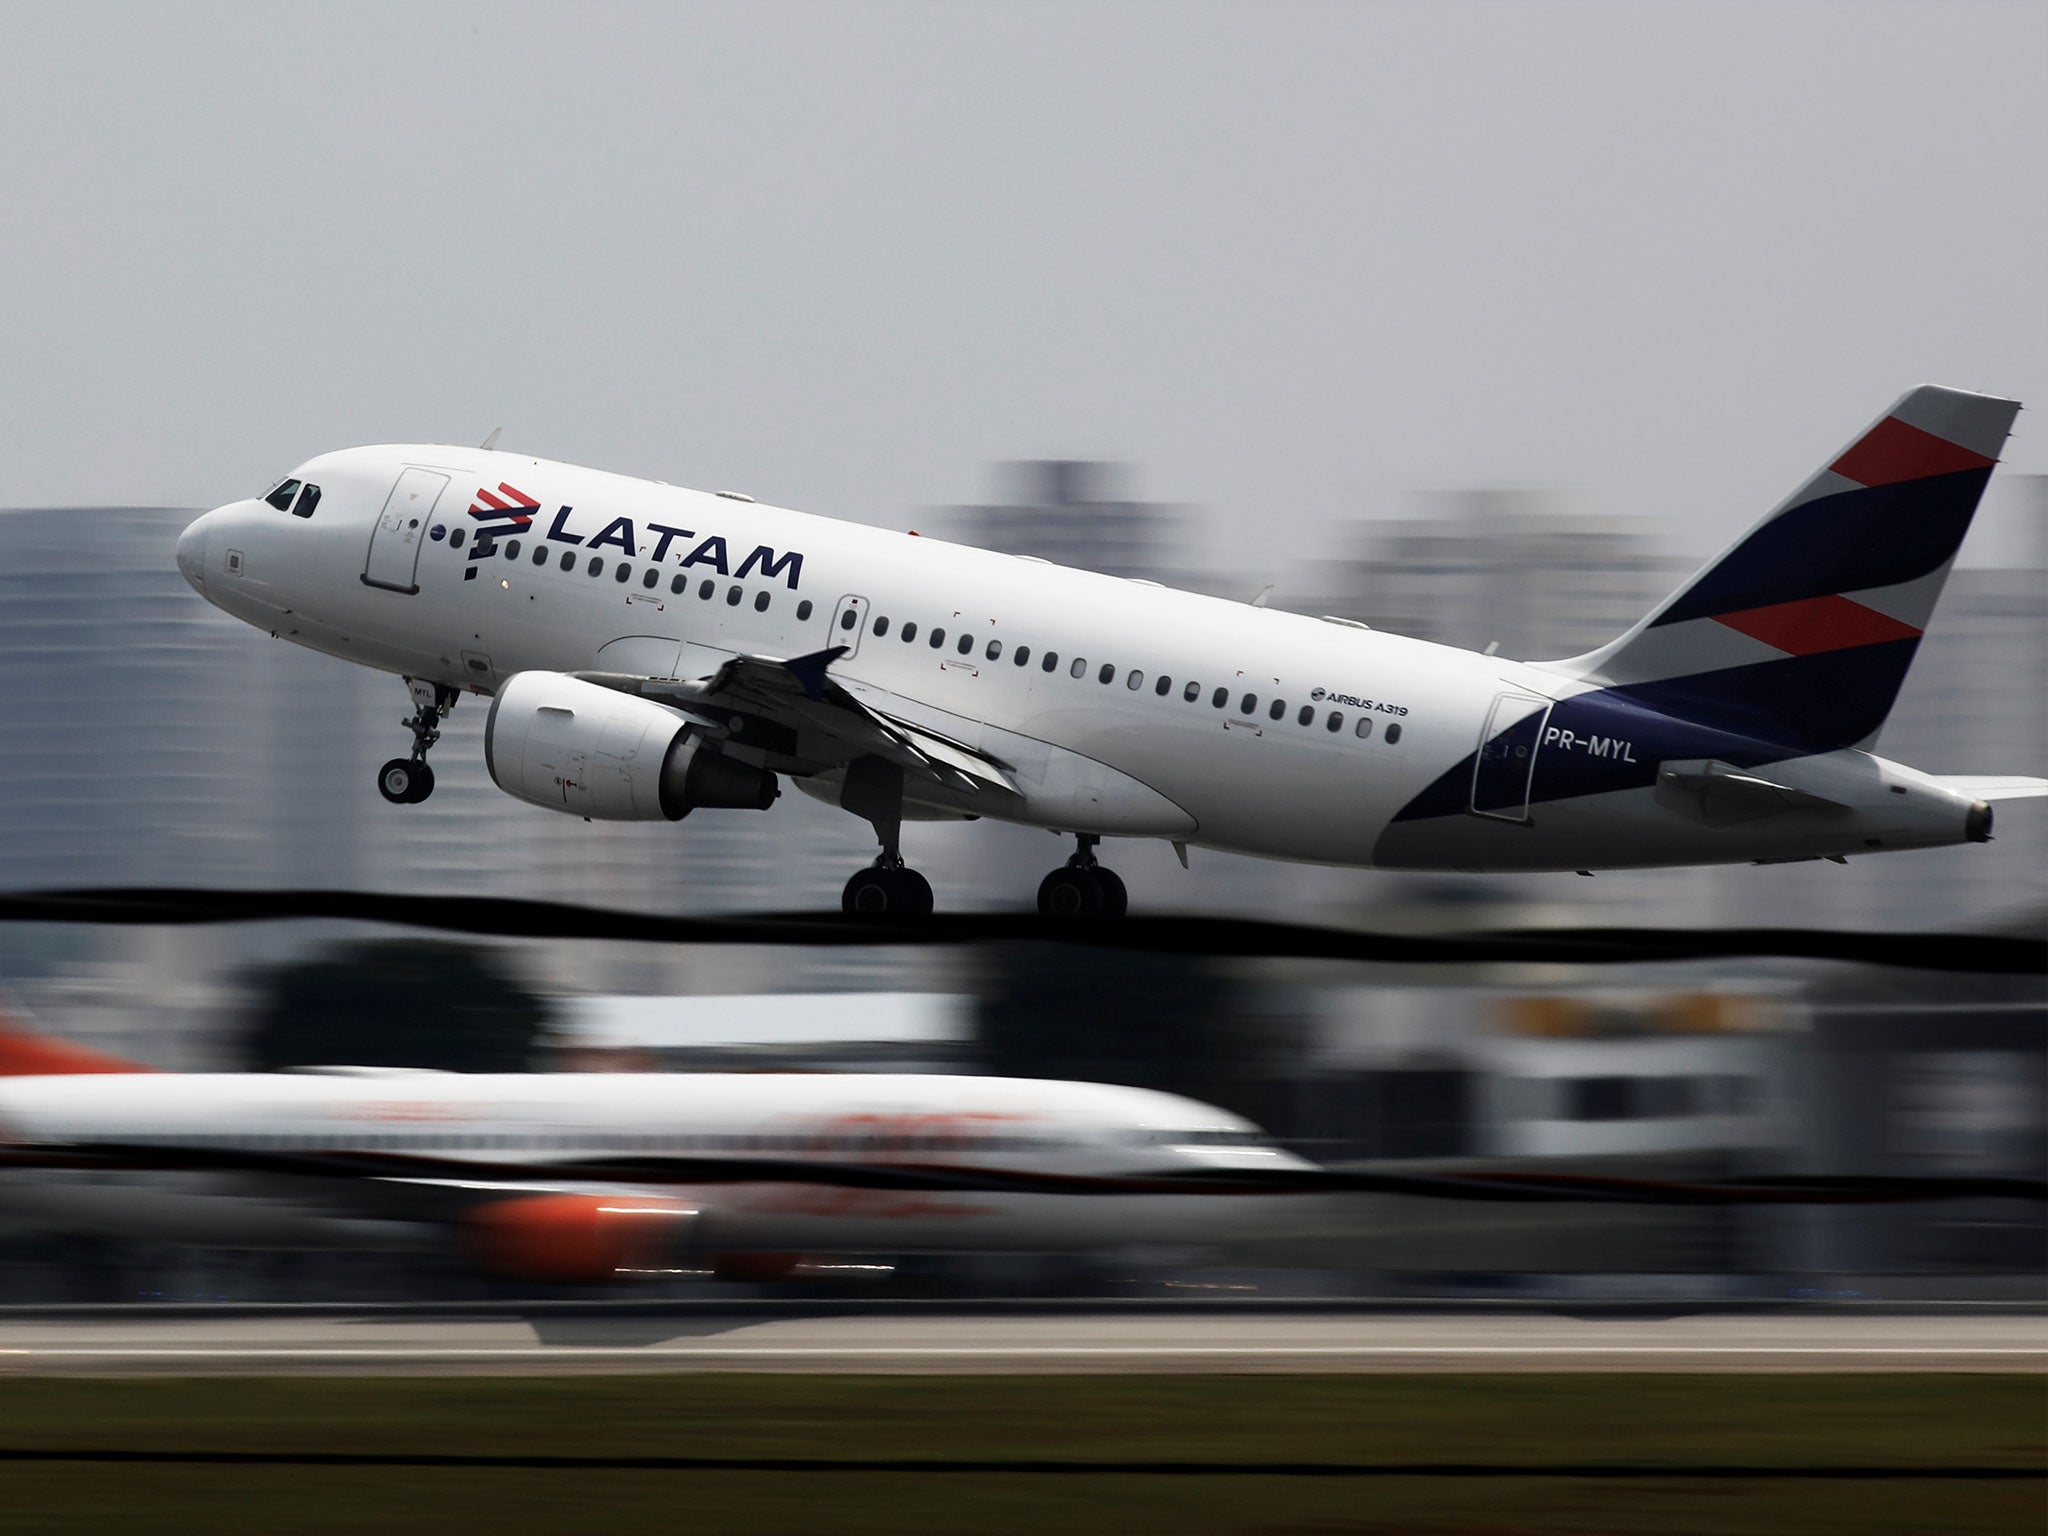 A Latam Airlines A319 takes off from Congonhas airport in Sao Paulo, Brazil